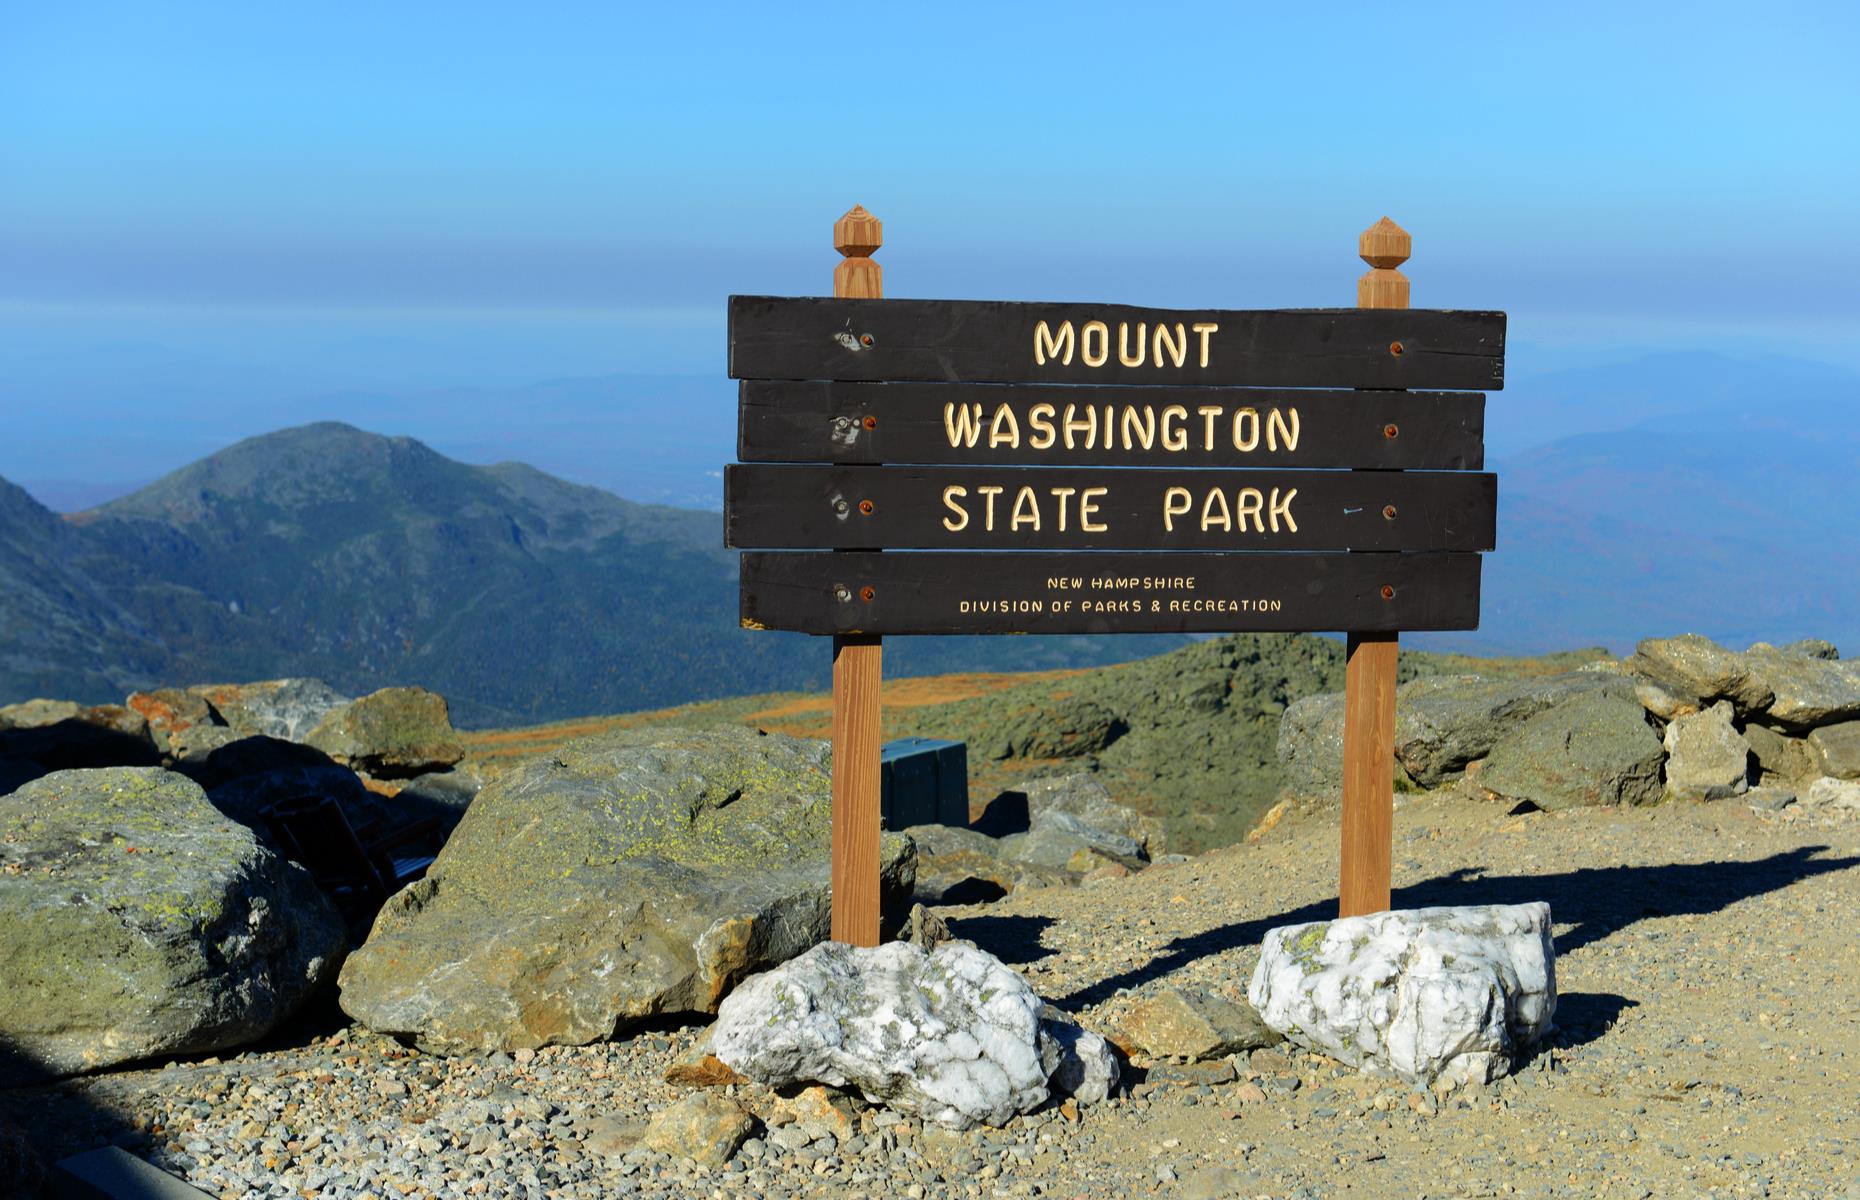 <p>New Hampshire's Mount Washington is the highest peak in the rugged White Mountains range at 6,288 feet (1,917m). Only serious mountaineers should attempt to reach the summit in winter, but from spring through to fall, visitors can ride the <a href="https://www.thecog.com">Mount Washington Cog Railway</a> to the top, enjoying spectacular mountain views and informative narration along the way.</p>